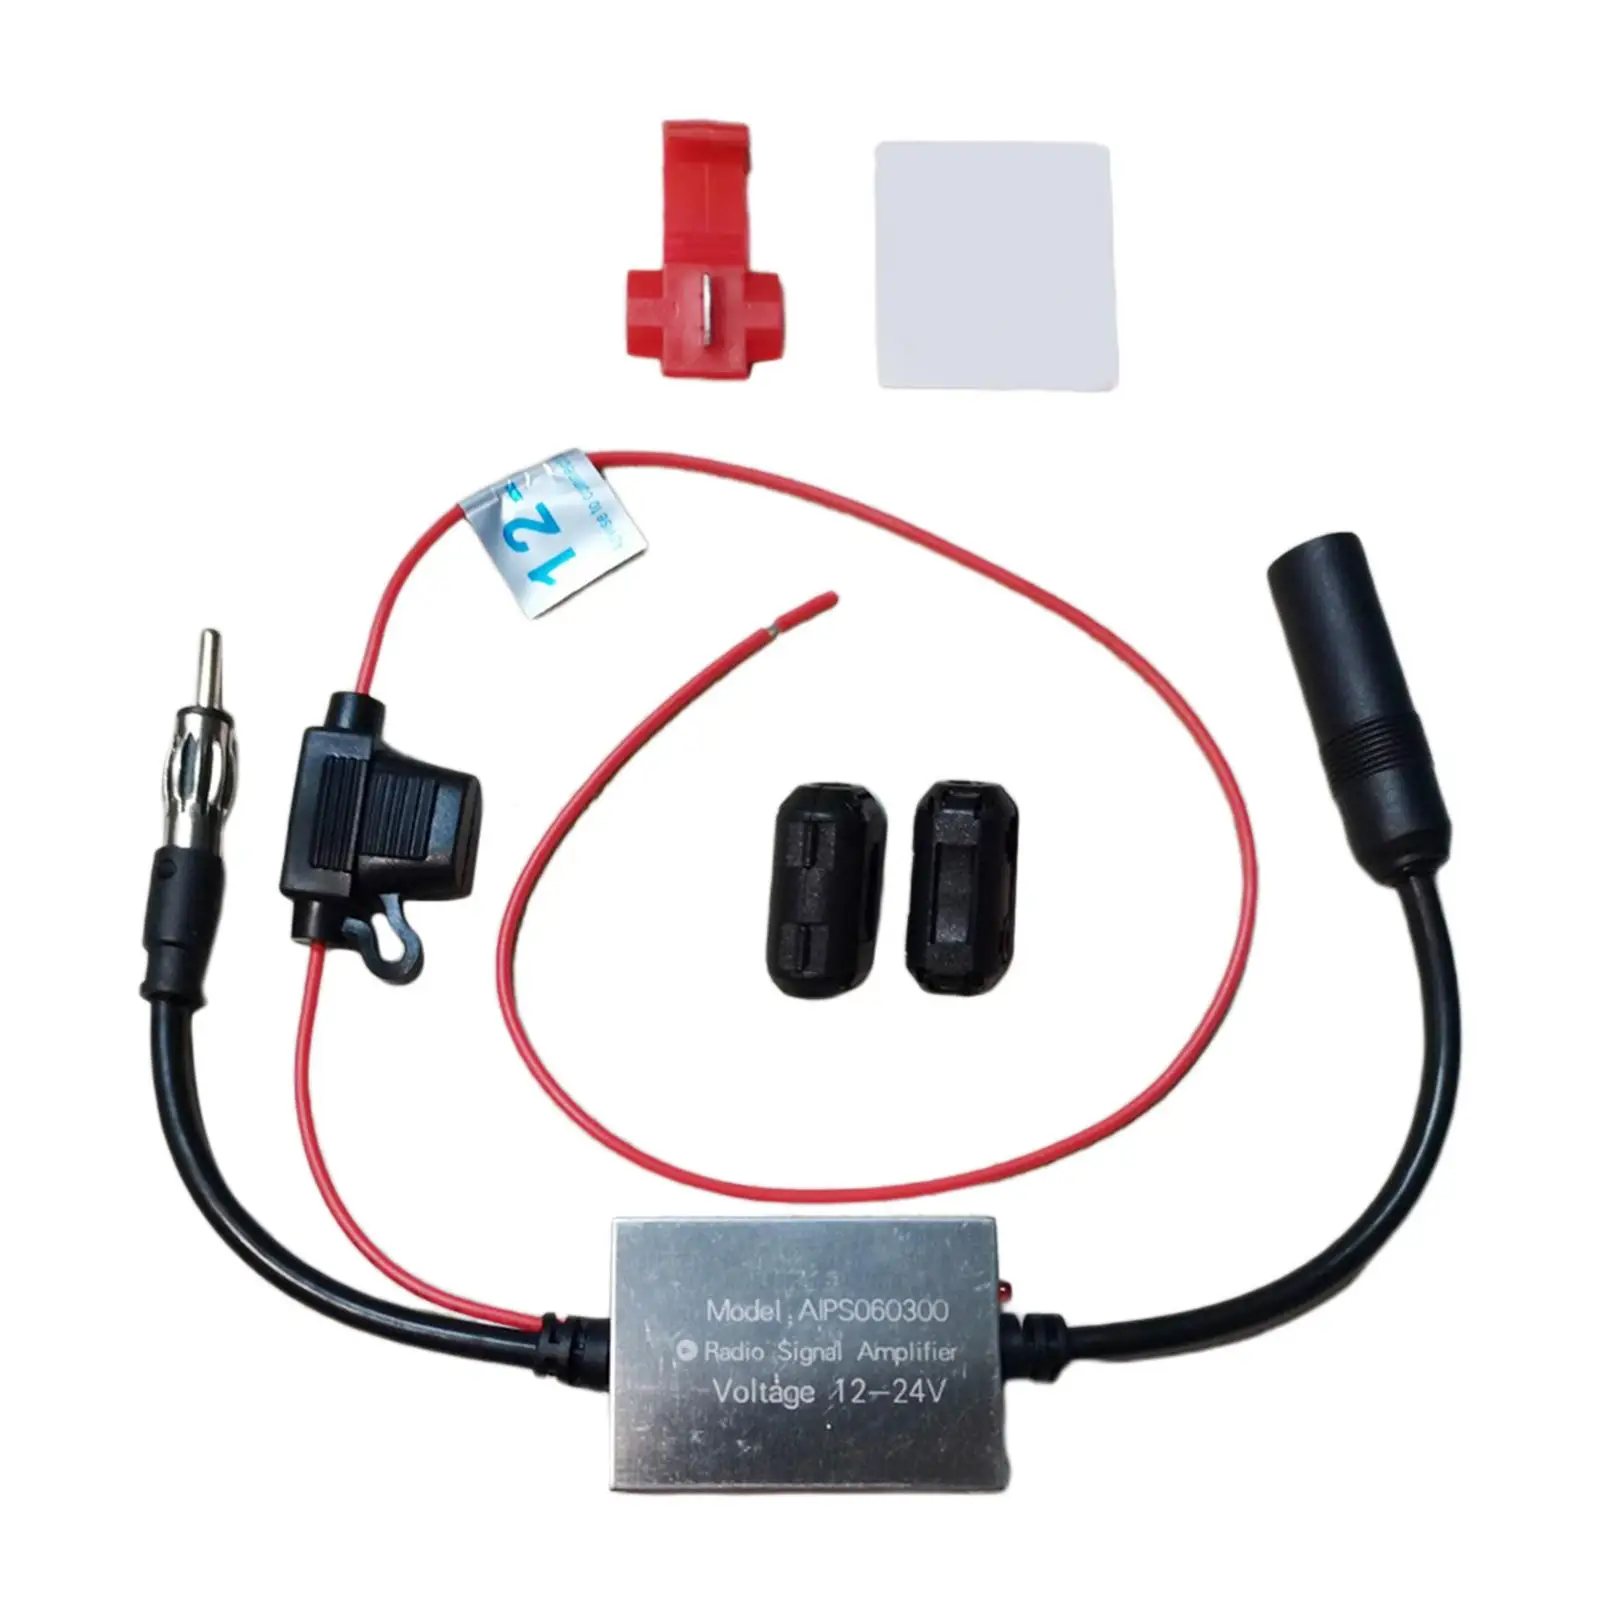 FM Radio Antenna Signal Booster Amplifier Signal Reception Amplifier High Gain 12-24V Anti Interference for Vehicle Truck